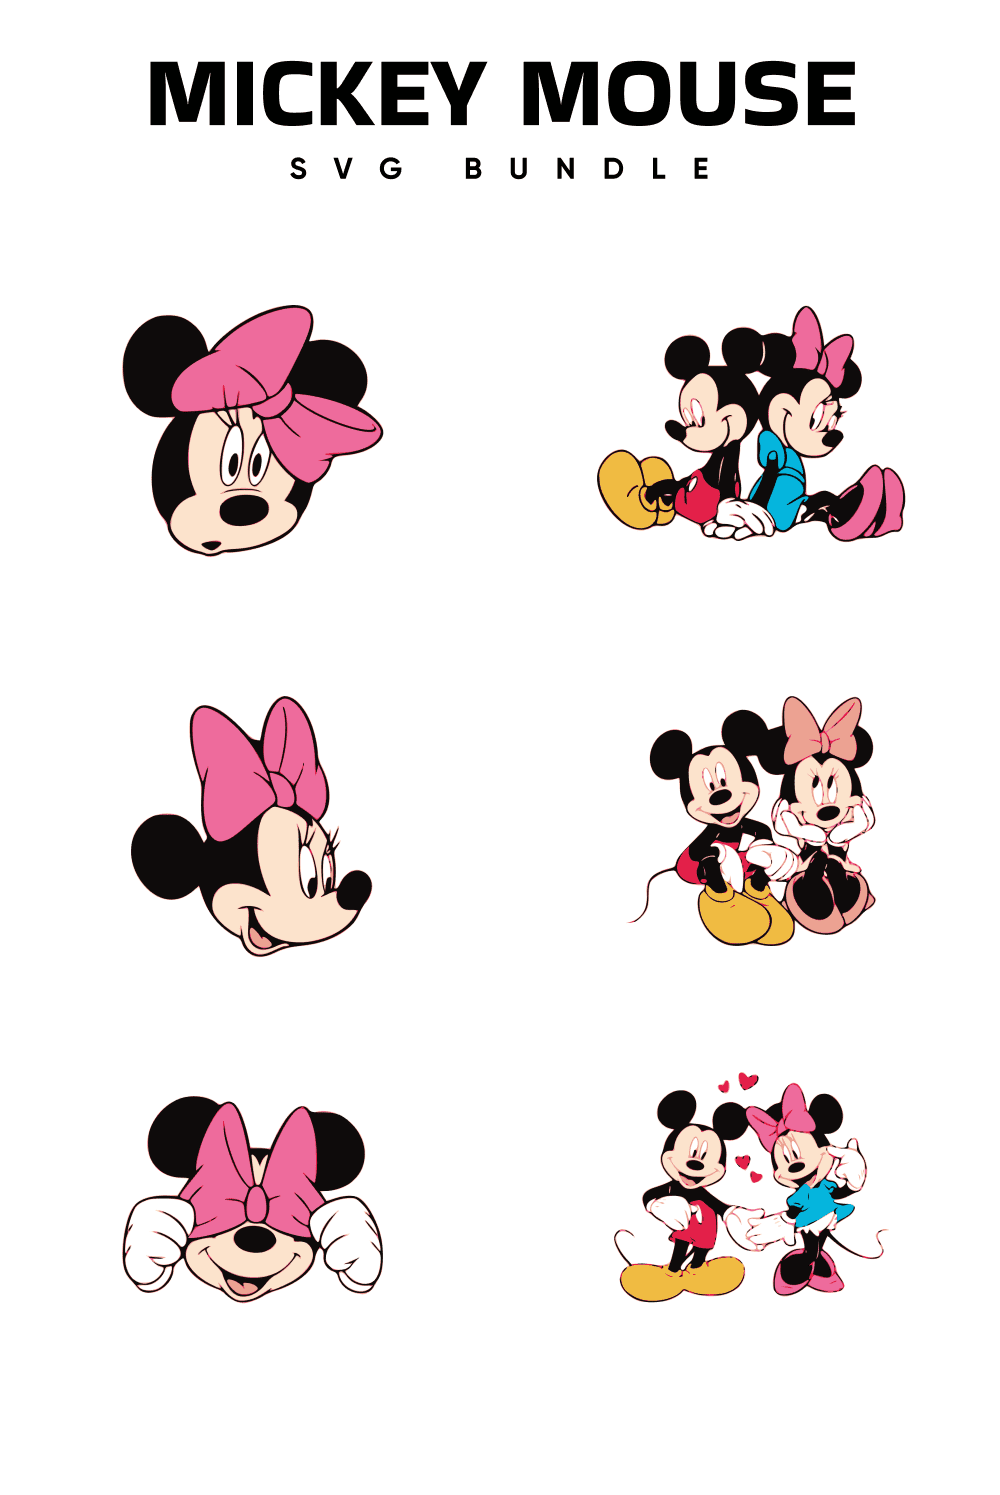 Set of gorgeous minnie mouse and mickey mouse images.